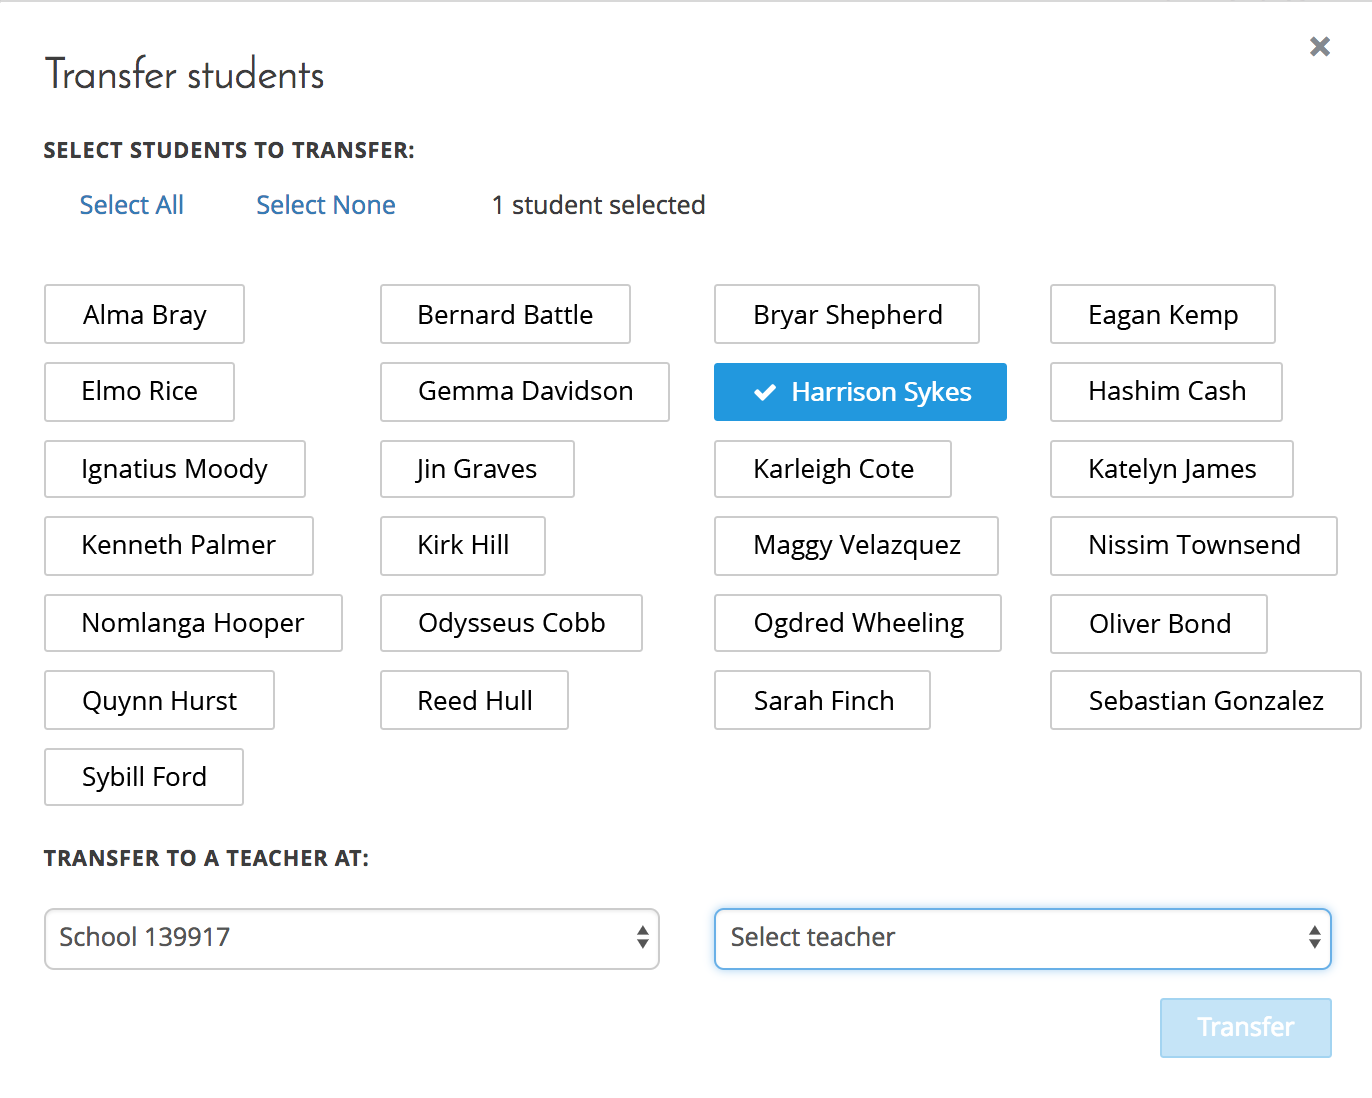 The Transfer students screen, with one student already selected. You can select additional students, or use the Select All and Select None links to select or deselect all the students at once. At the bottom are drop-down lists where you can select a school and teacher to transfer the student to. The Transfer button is below the drop-down lists.